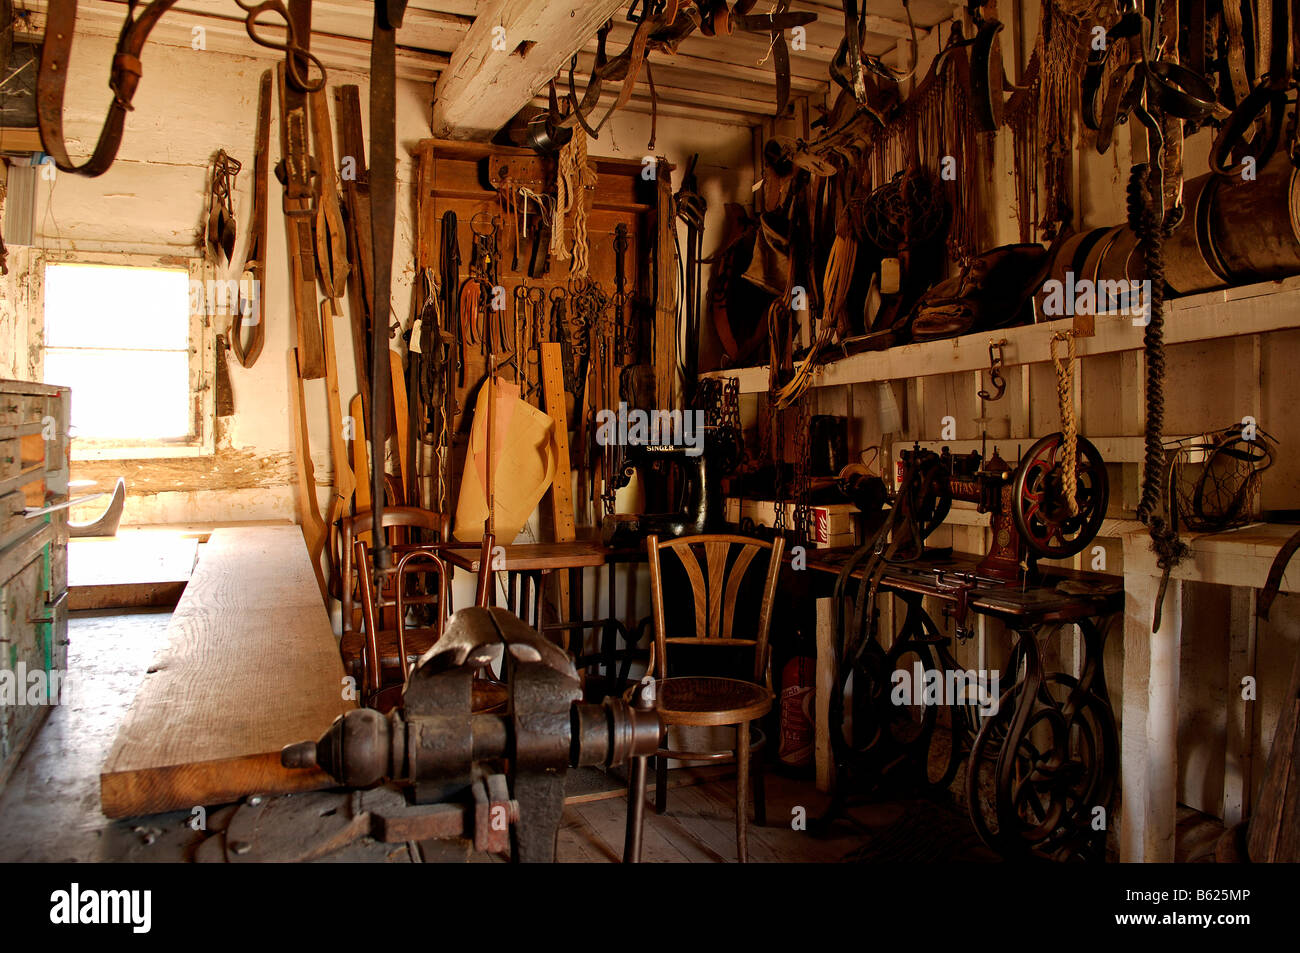 Old sadlery, Eco-Museum, Ungersheim, Alsace, France, Europe Stock Photo